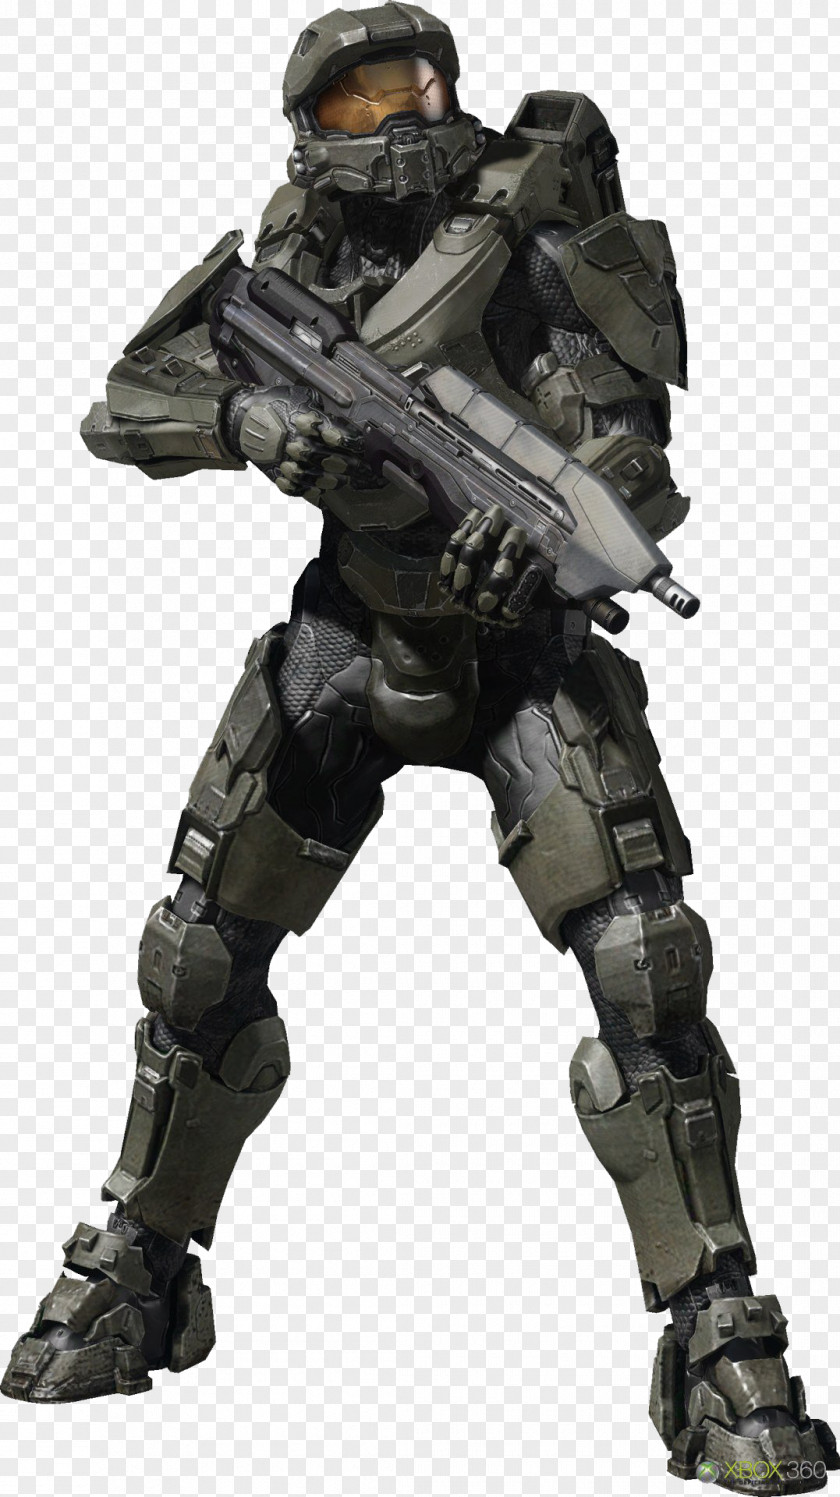 Halo Wars Halo: The Master Chief Collection 4 5: Guardians 3: ODST 2 PNG